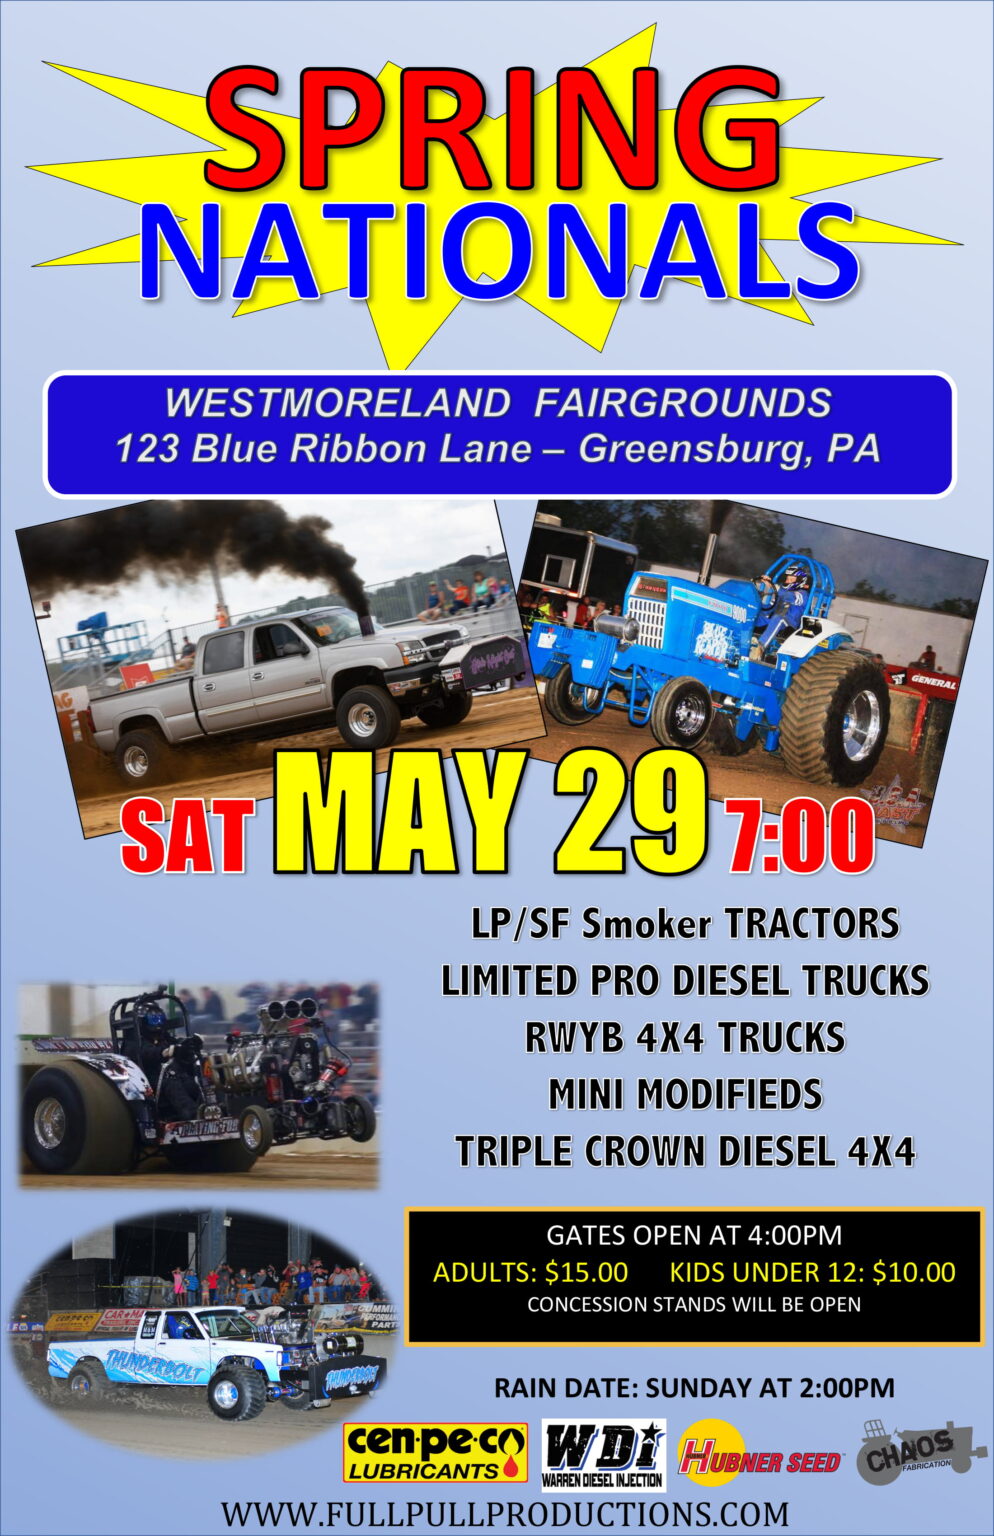 SPRING NATIONALS MAY 29 WESTMORELAND FAIRGROUNDS Full Pull